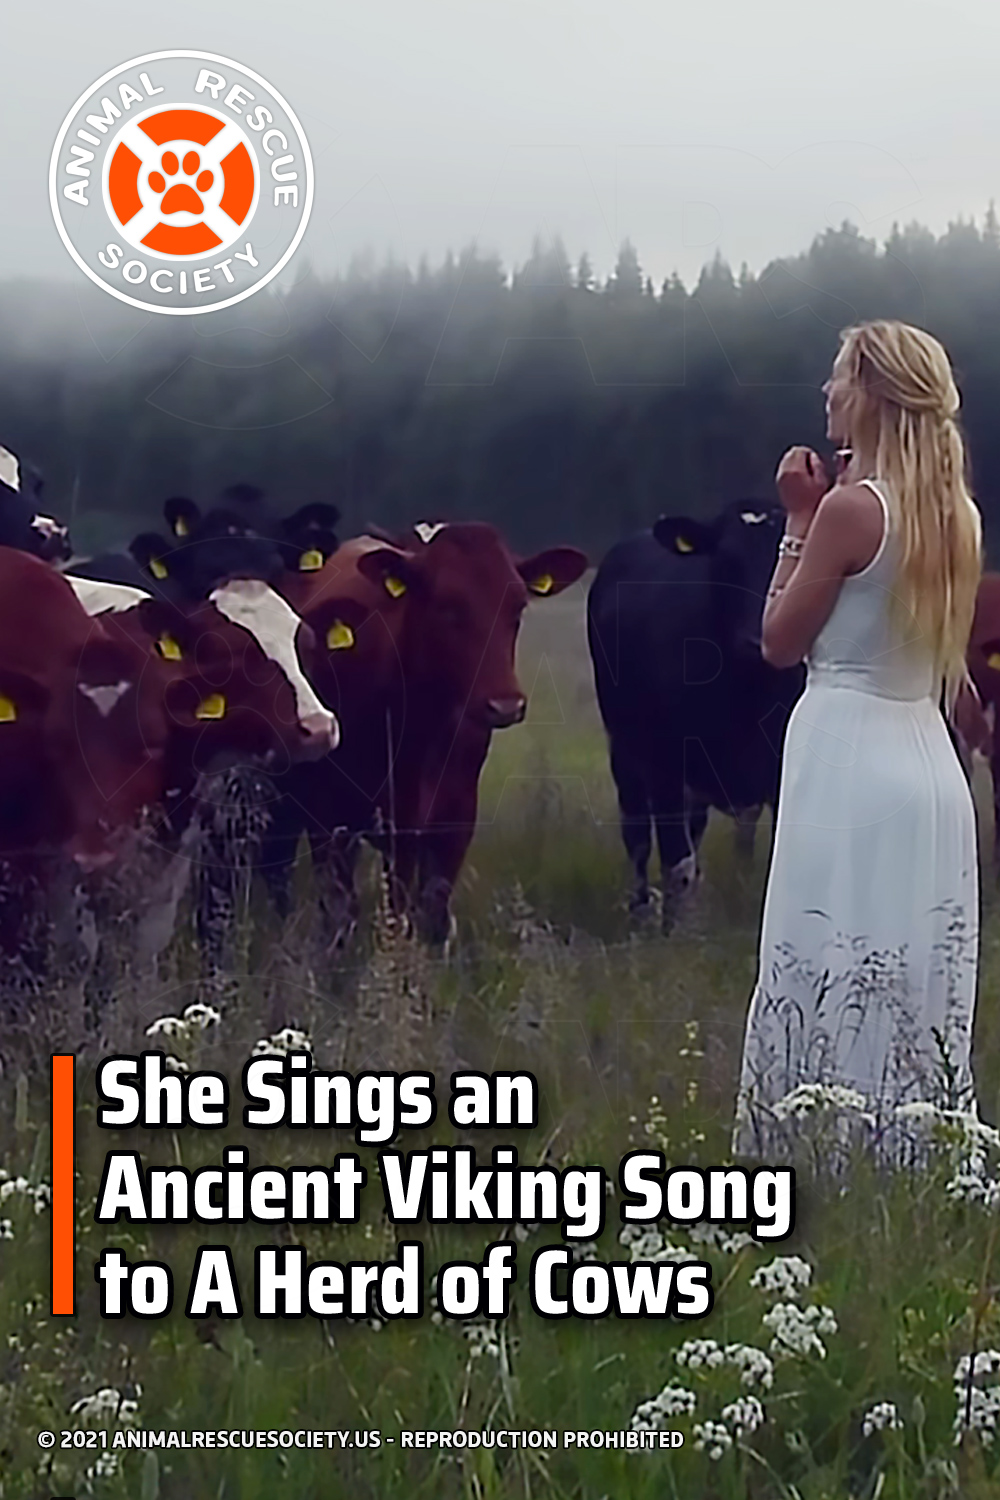 She Sings an Ancient Viking Song to A Herd of Cows